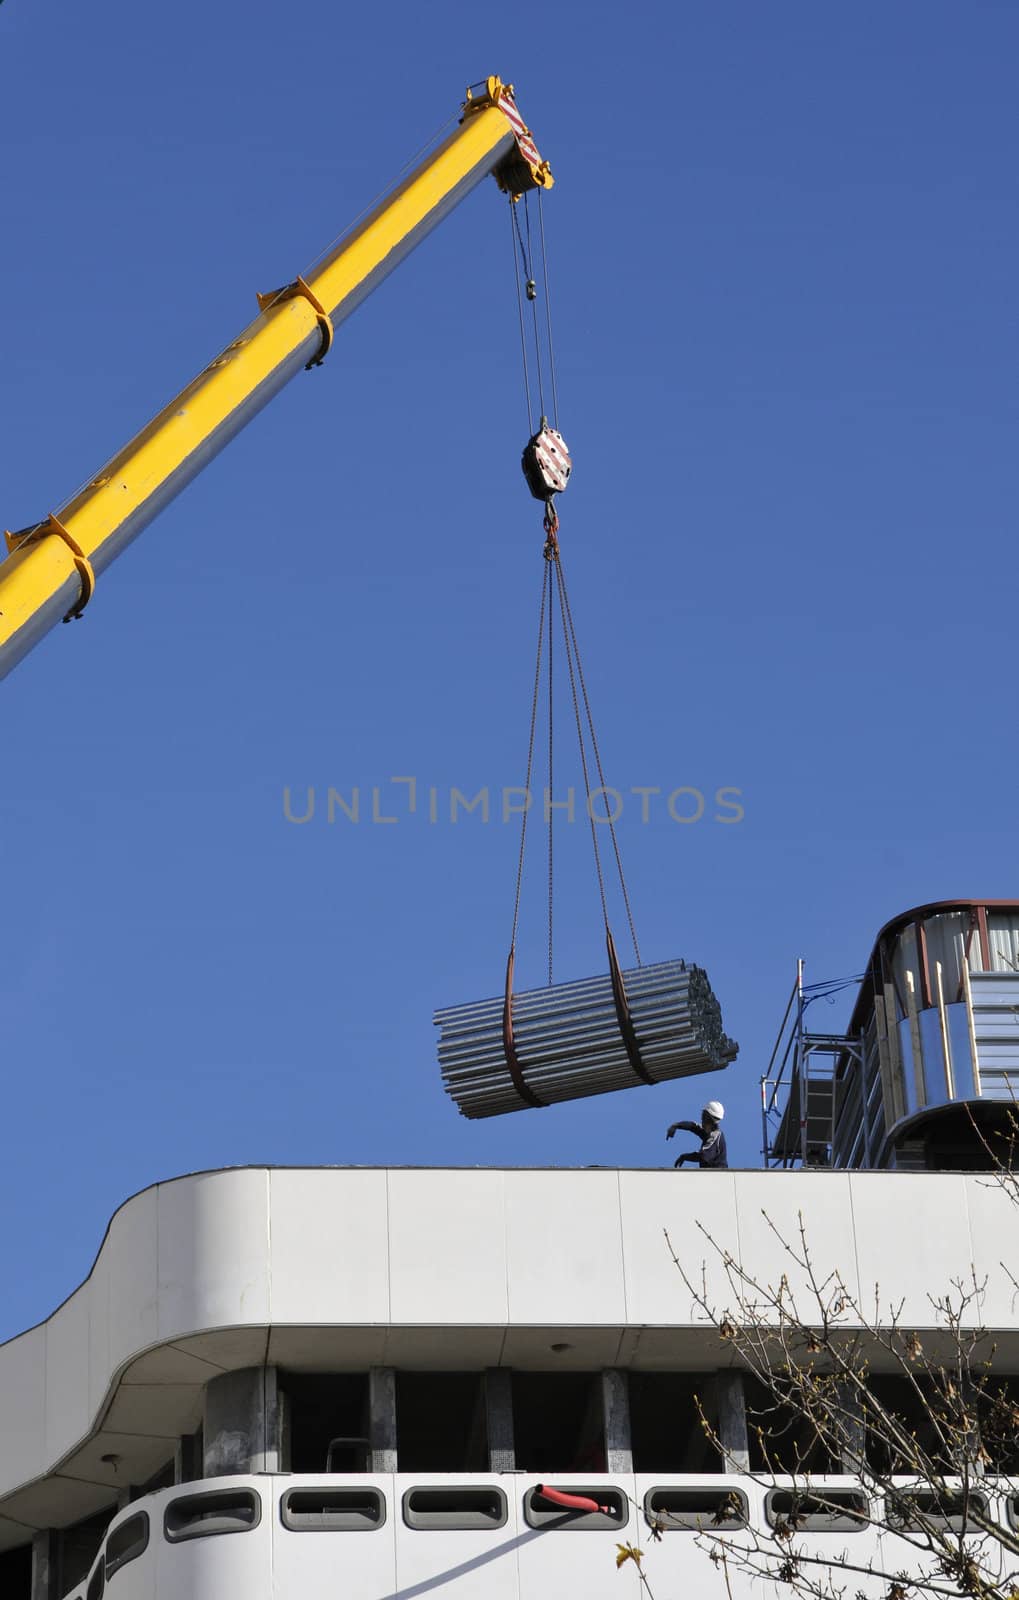 Yellow Crane carrying some metallic tubes with a man to help